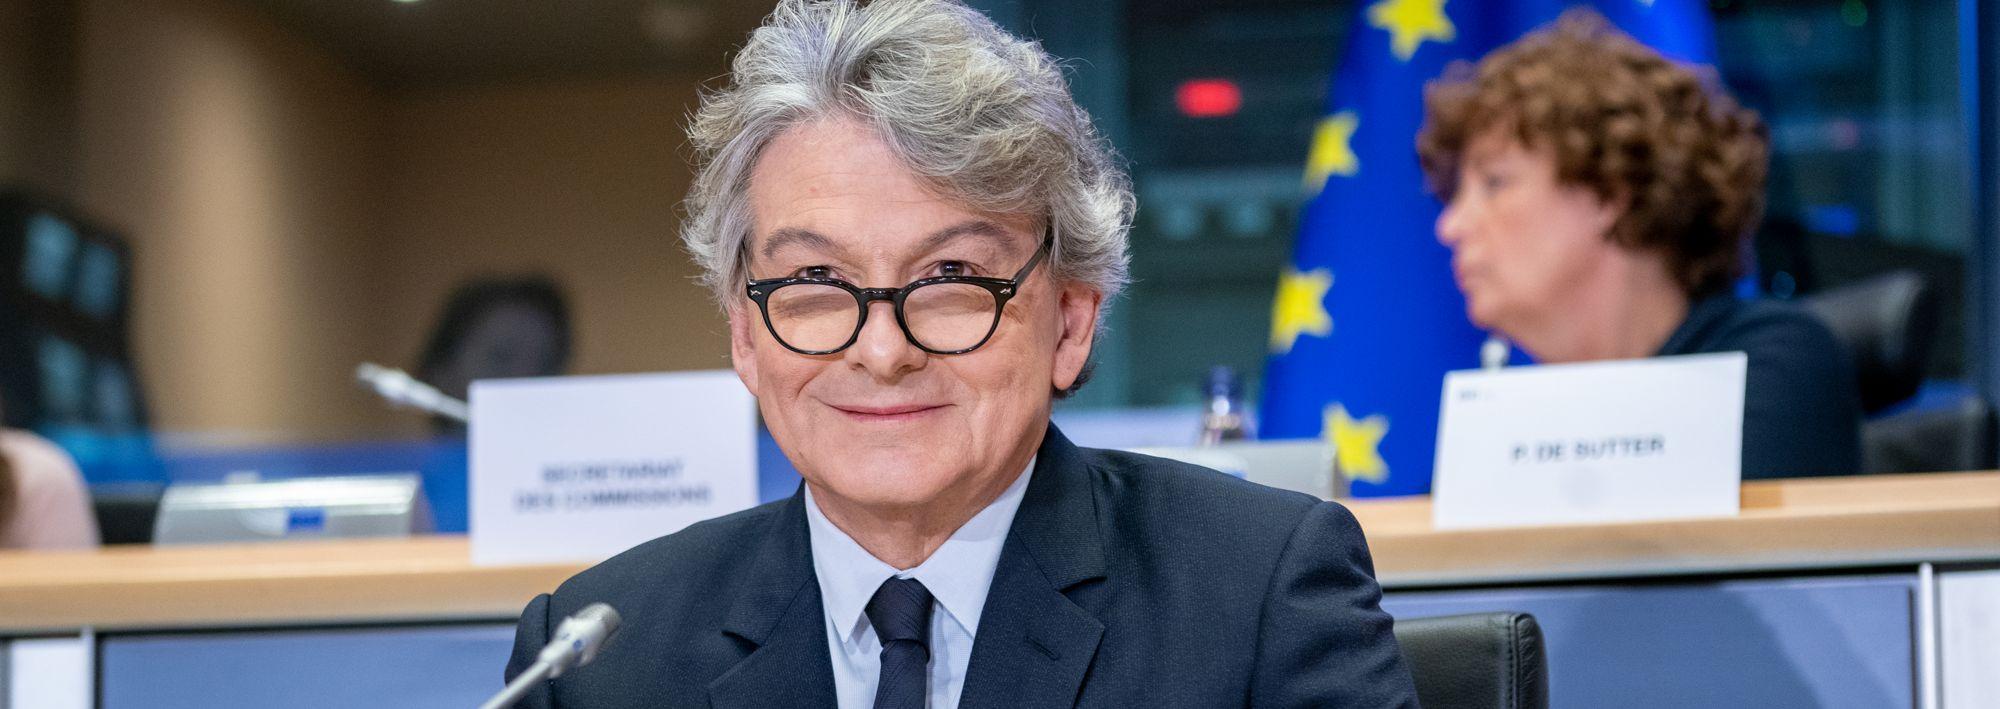 Thierry Breton in het Europees Parlement. bron: European Parliament from EU [CC BY 2.0]